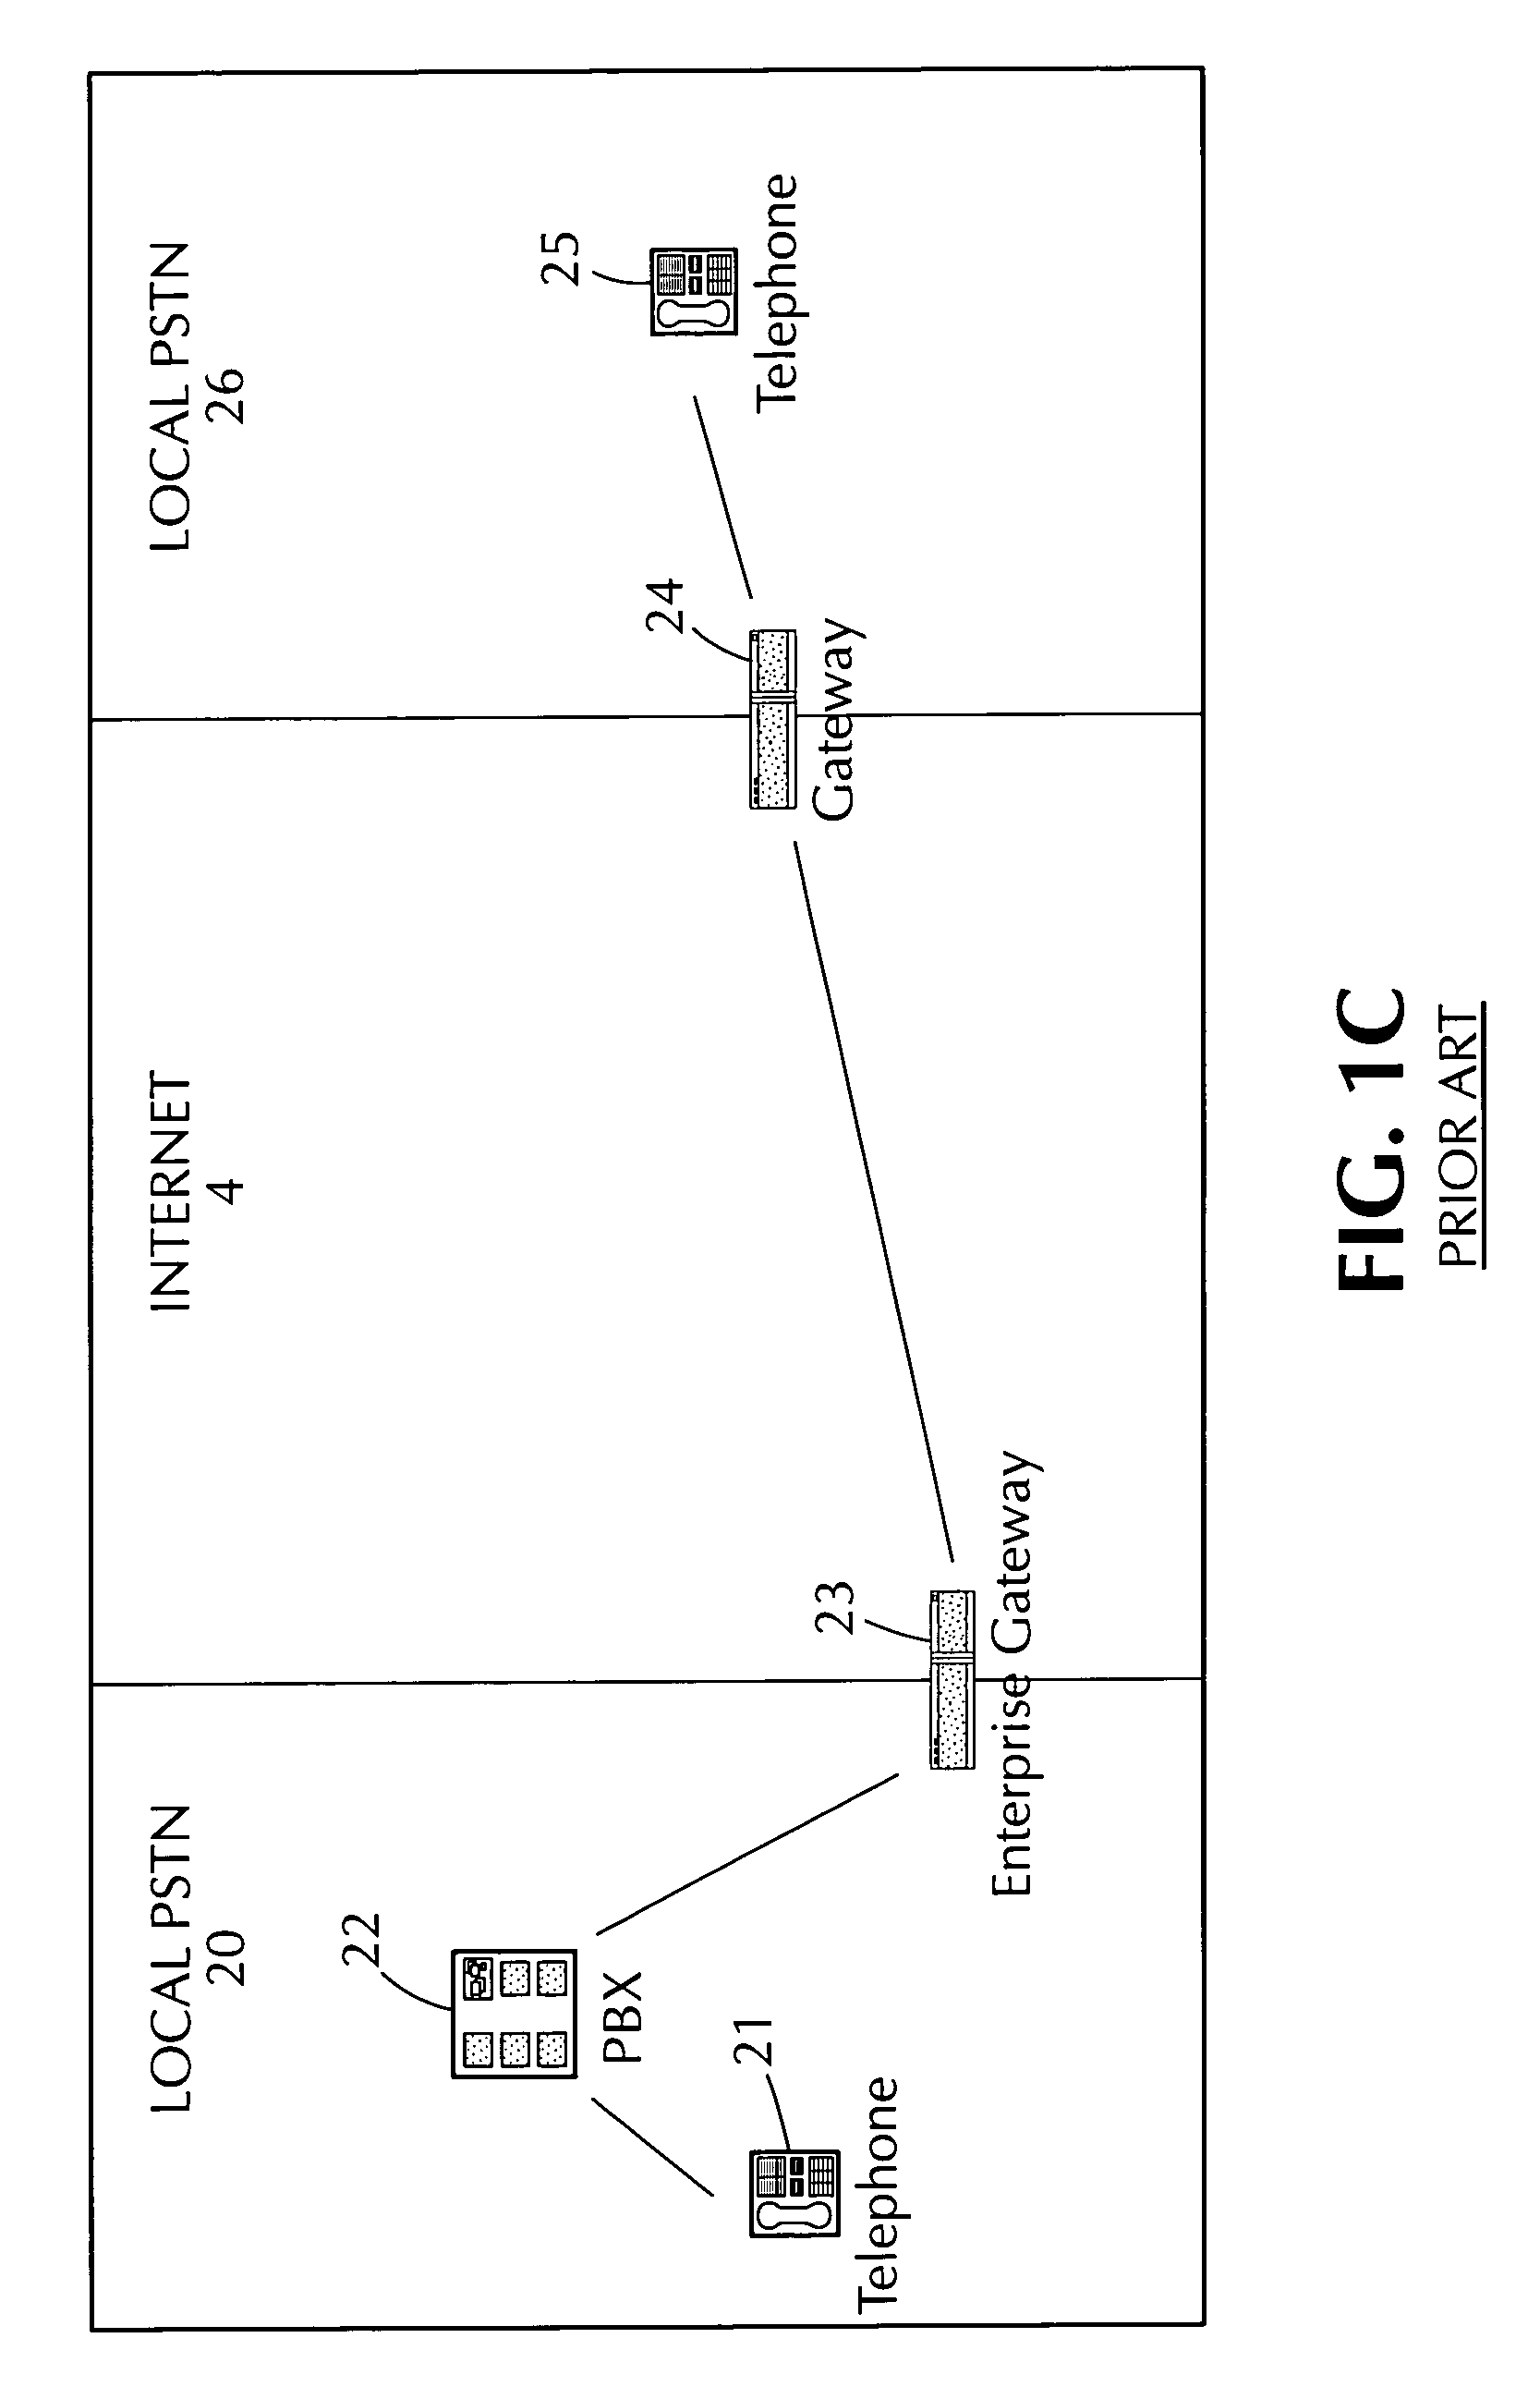 Method and apparatus for estimating the call grade of service and offered traffic for voice over internet protocol calls at a PSTN-IP network gateway